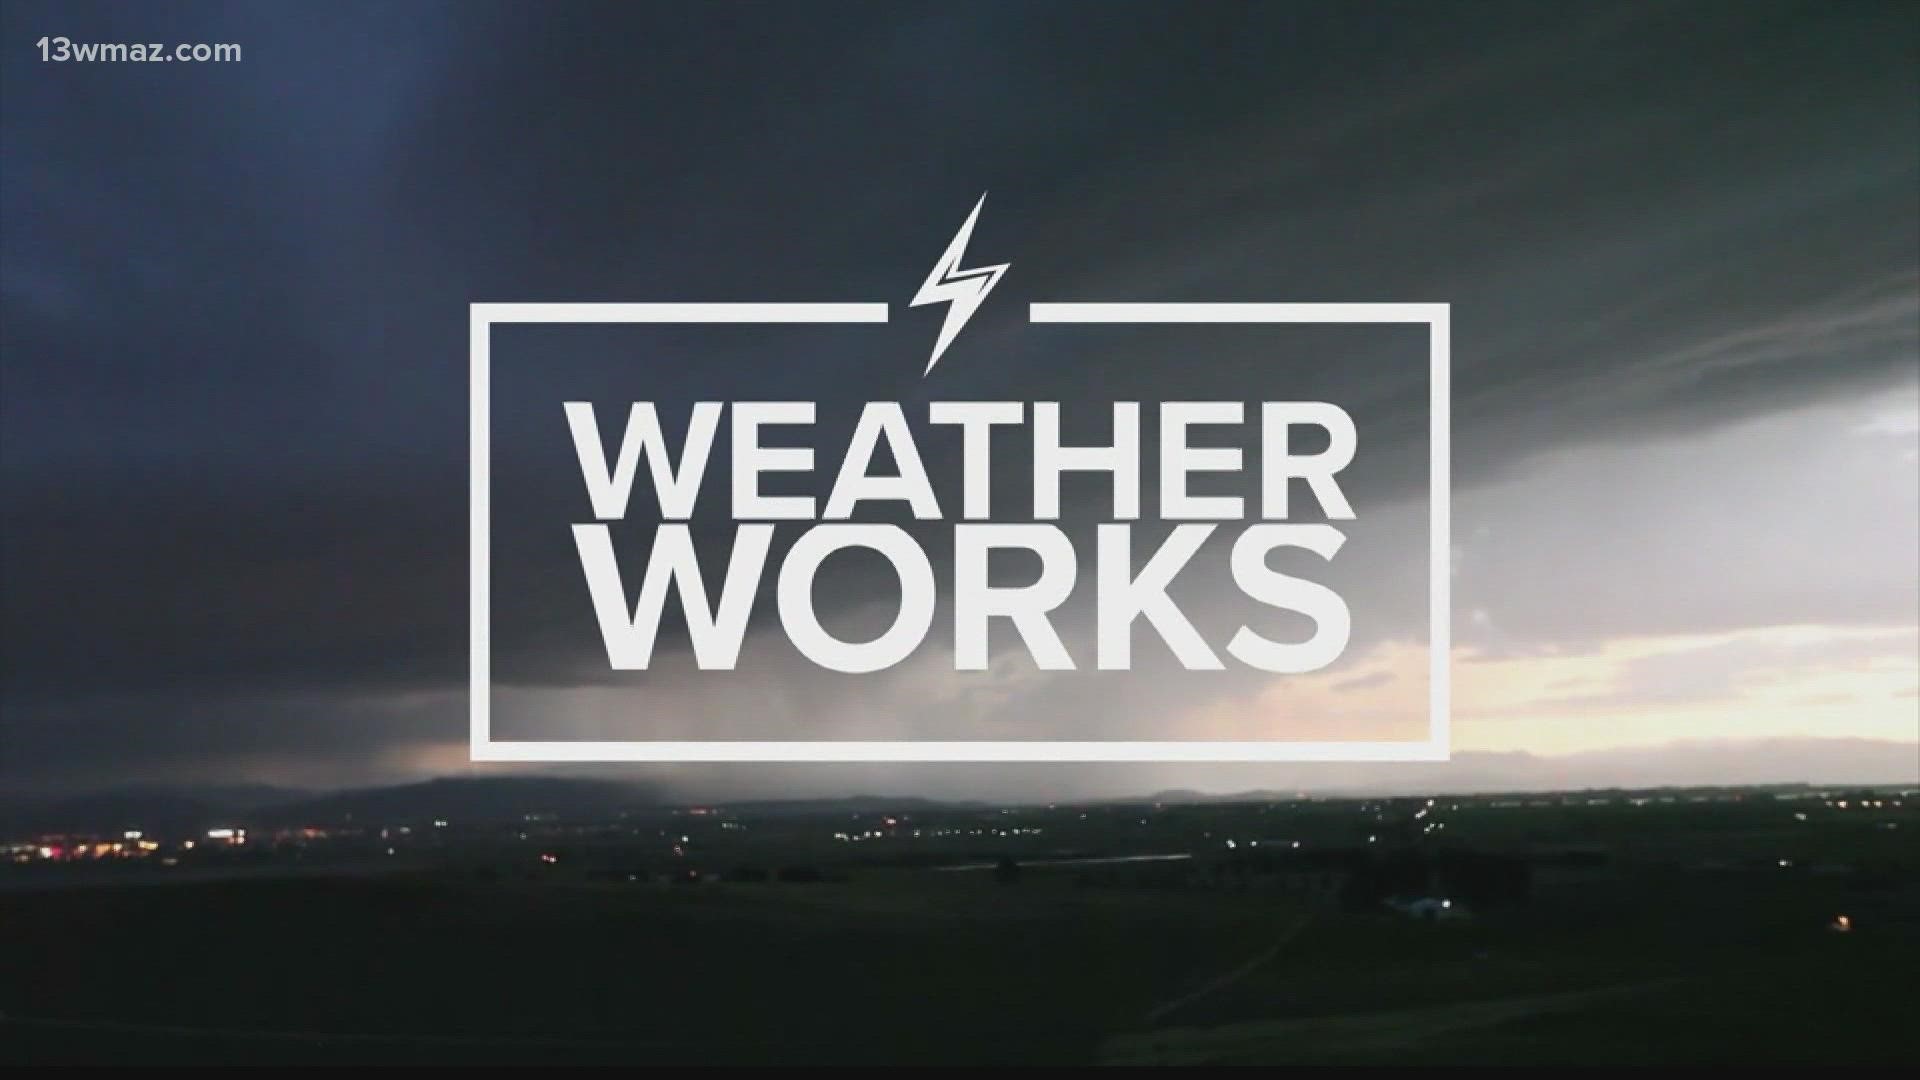 Meteorologist Taylor Stephenson breaks down the science of hail formation in this week's episode of "Weather Works."